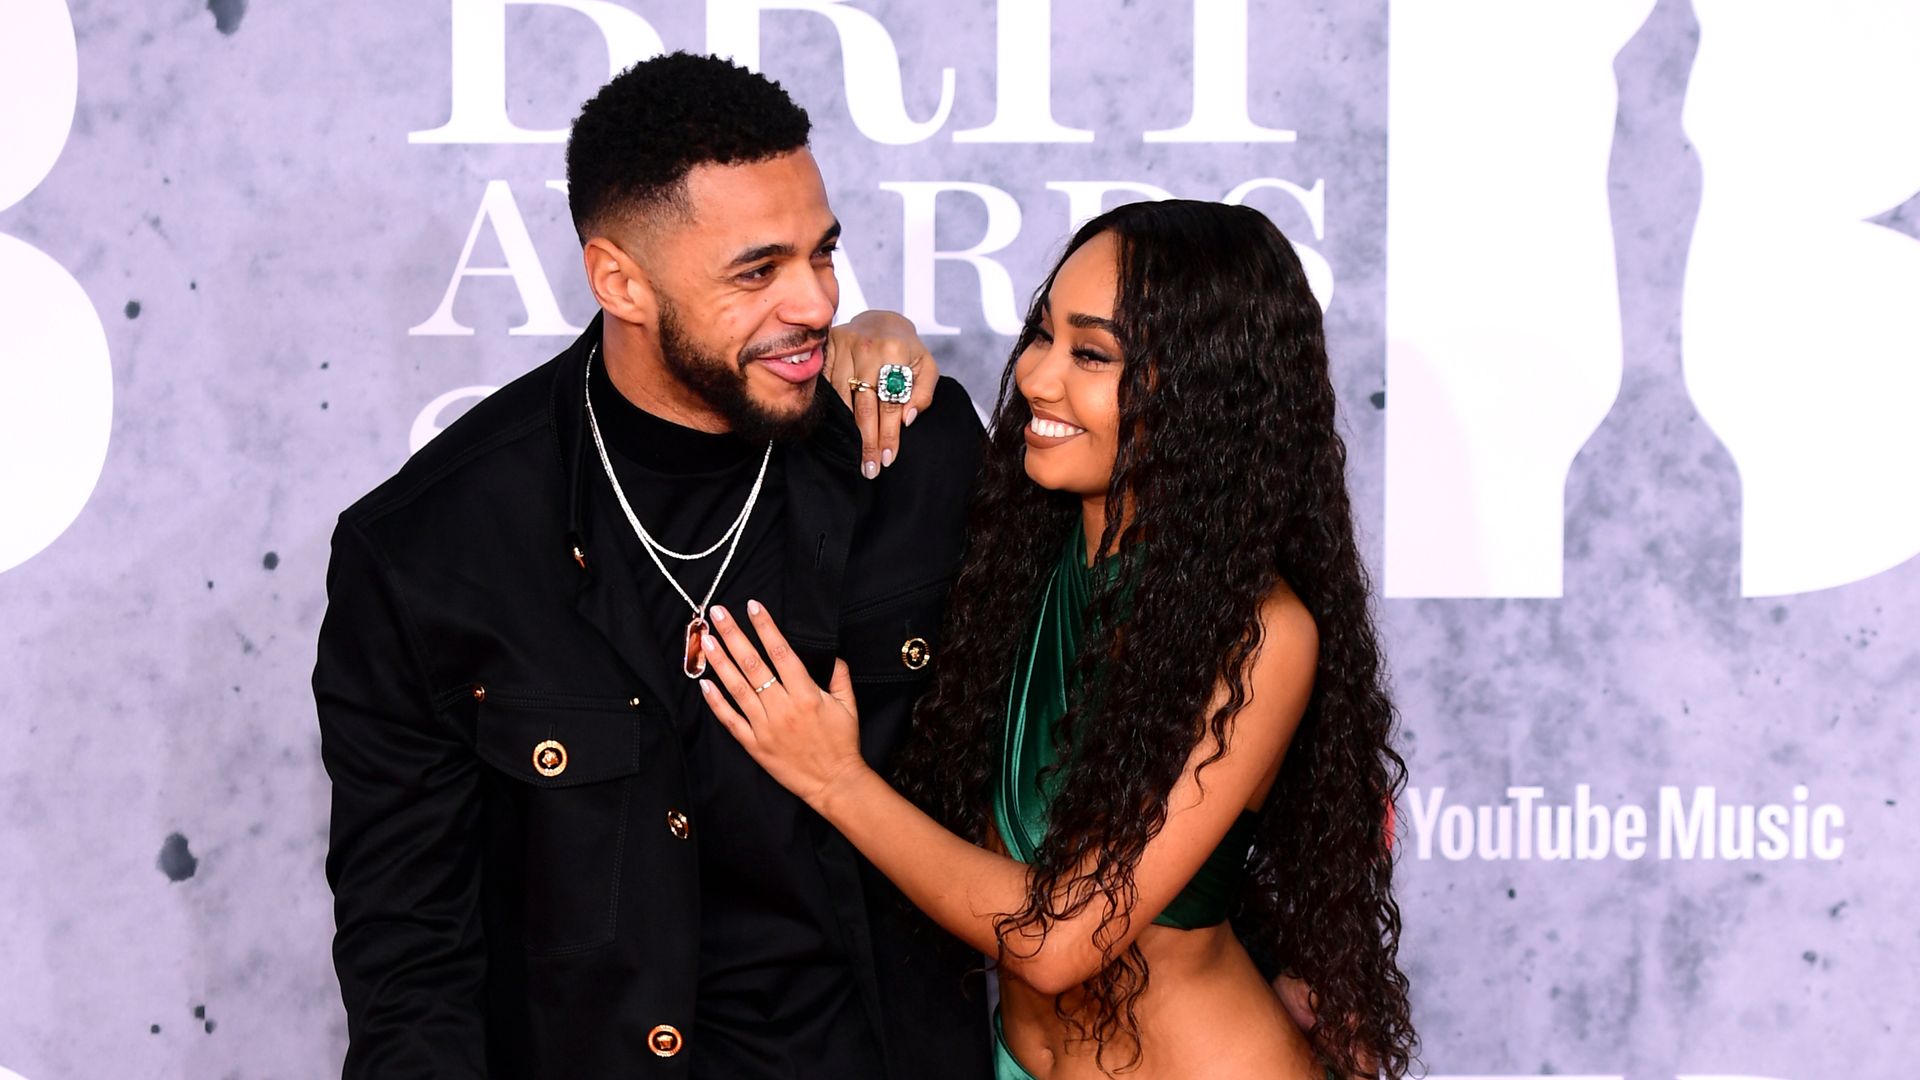 Andre Gray and Leigh-Anne Pinnock attending the Brit Awards 2019 at the O2 Arena, London